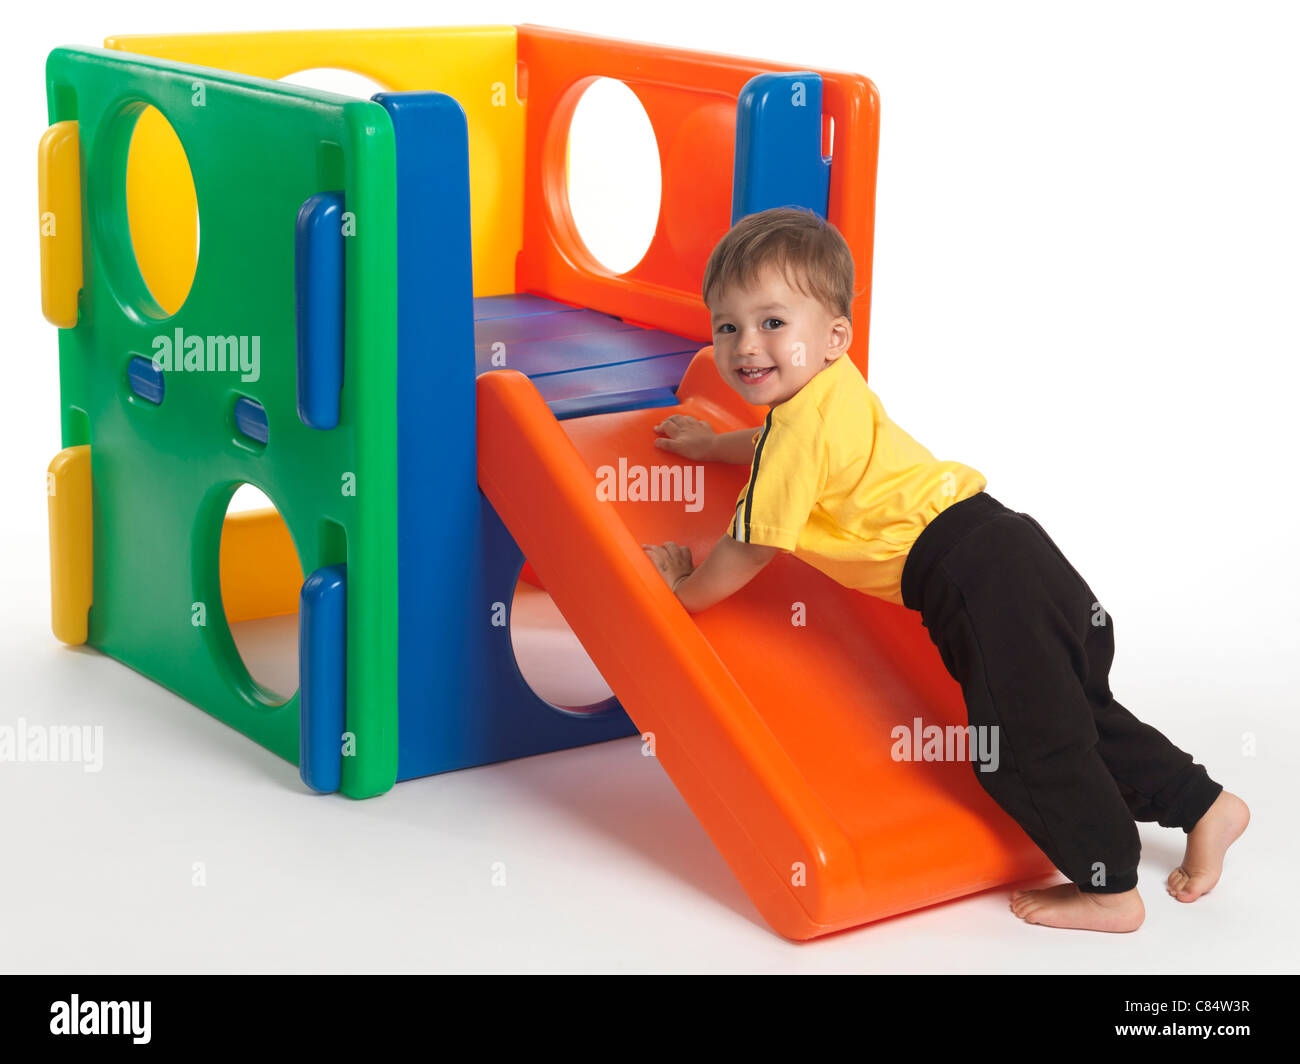 One and a half year old child climbing a slide. Isolated on white background. Stock Photo